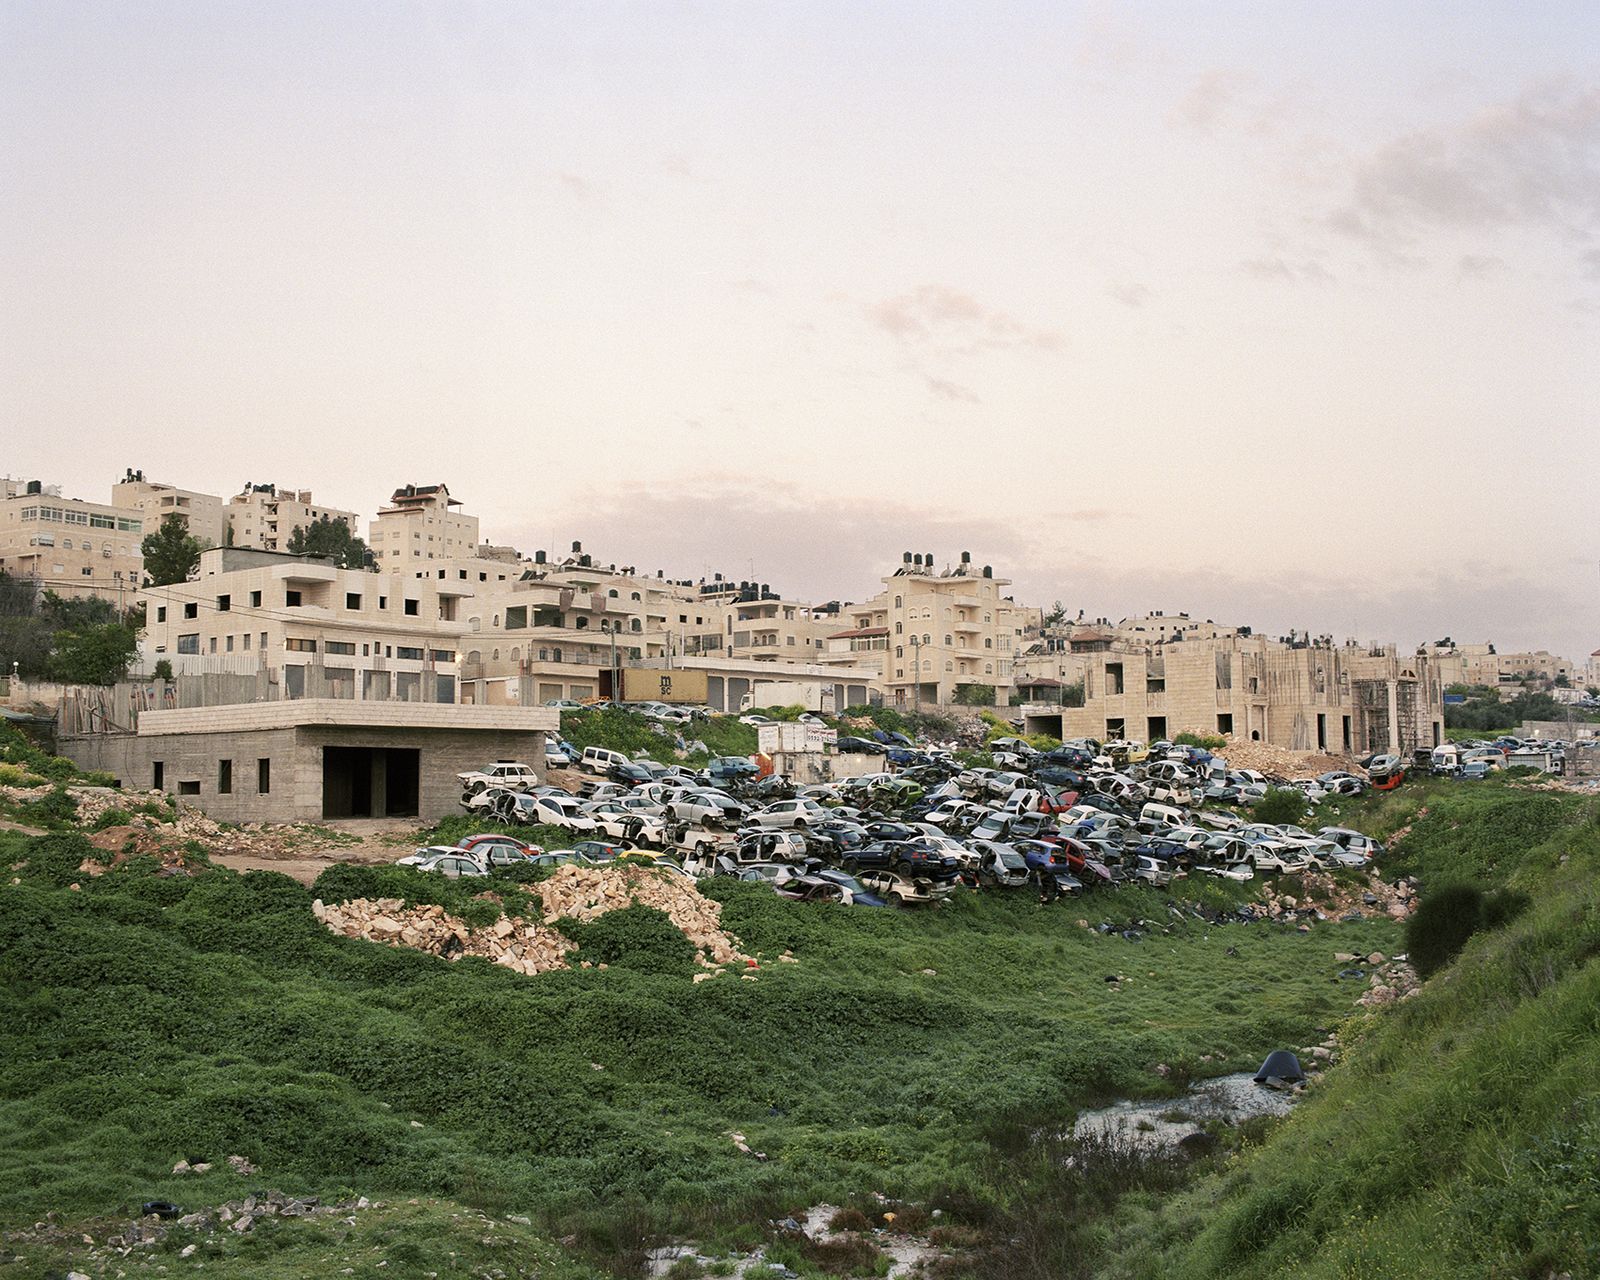 © Saja Quttaineh - A mountain of neglected cars (Car graveyard) and behind it a disorganized building in Al-Ram town, 2021.